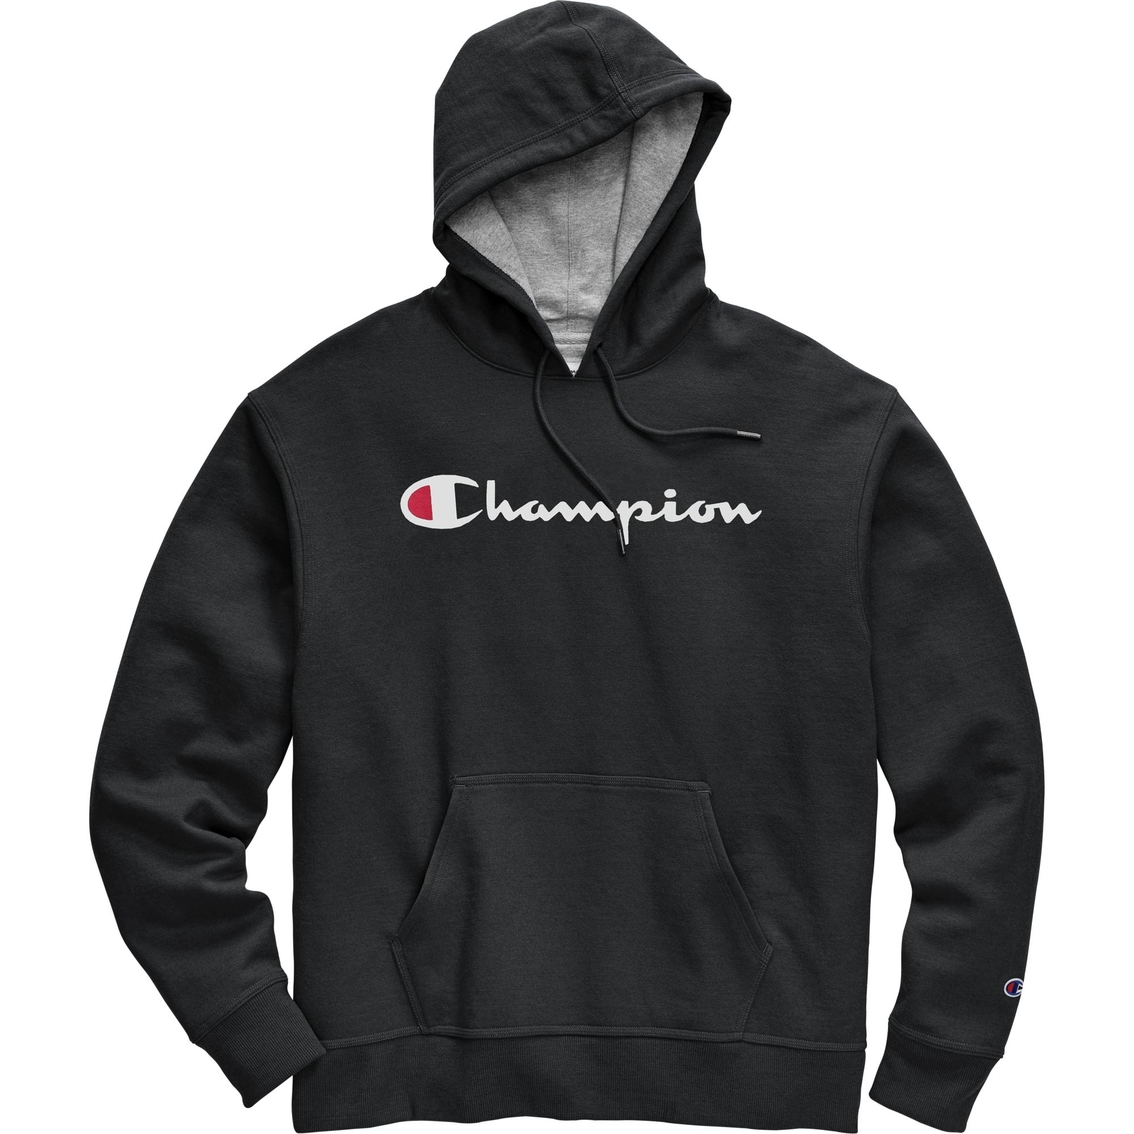 champion jackets and hoodies